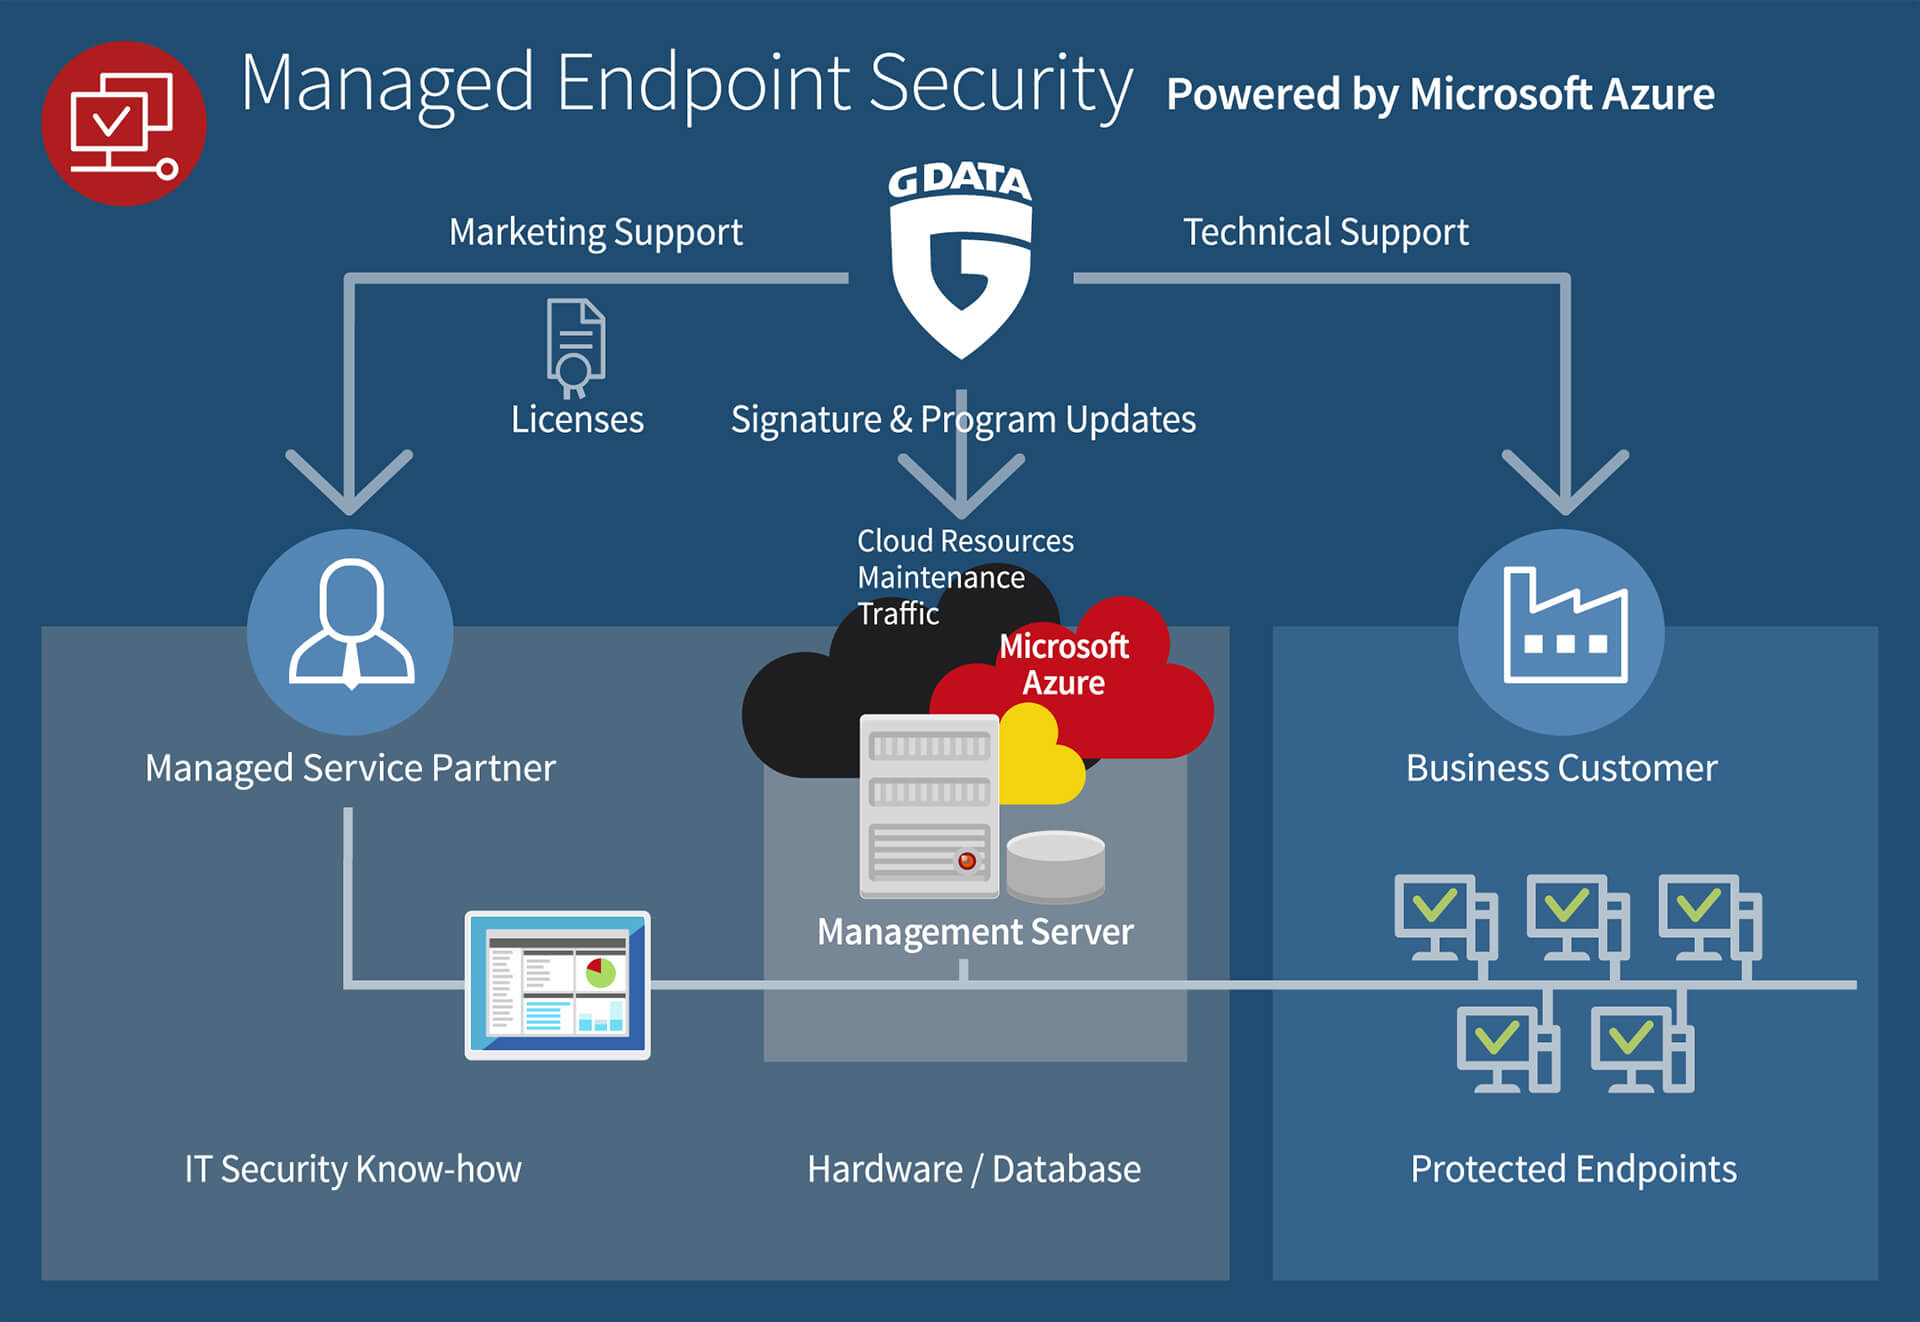 G DATA Managed Endpoint Security